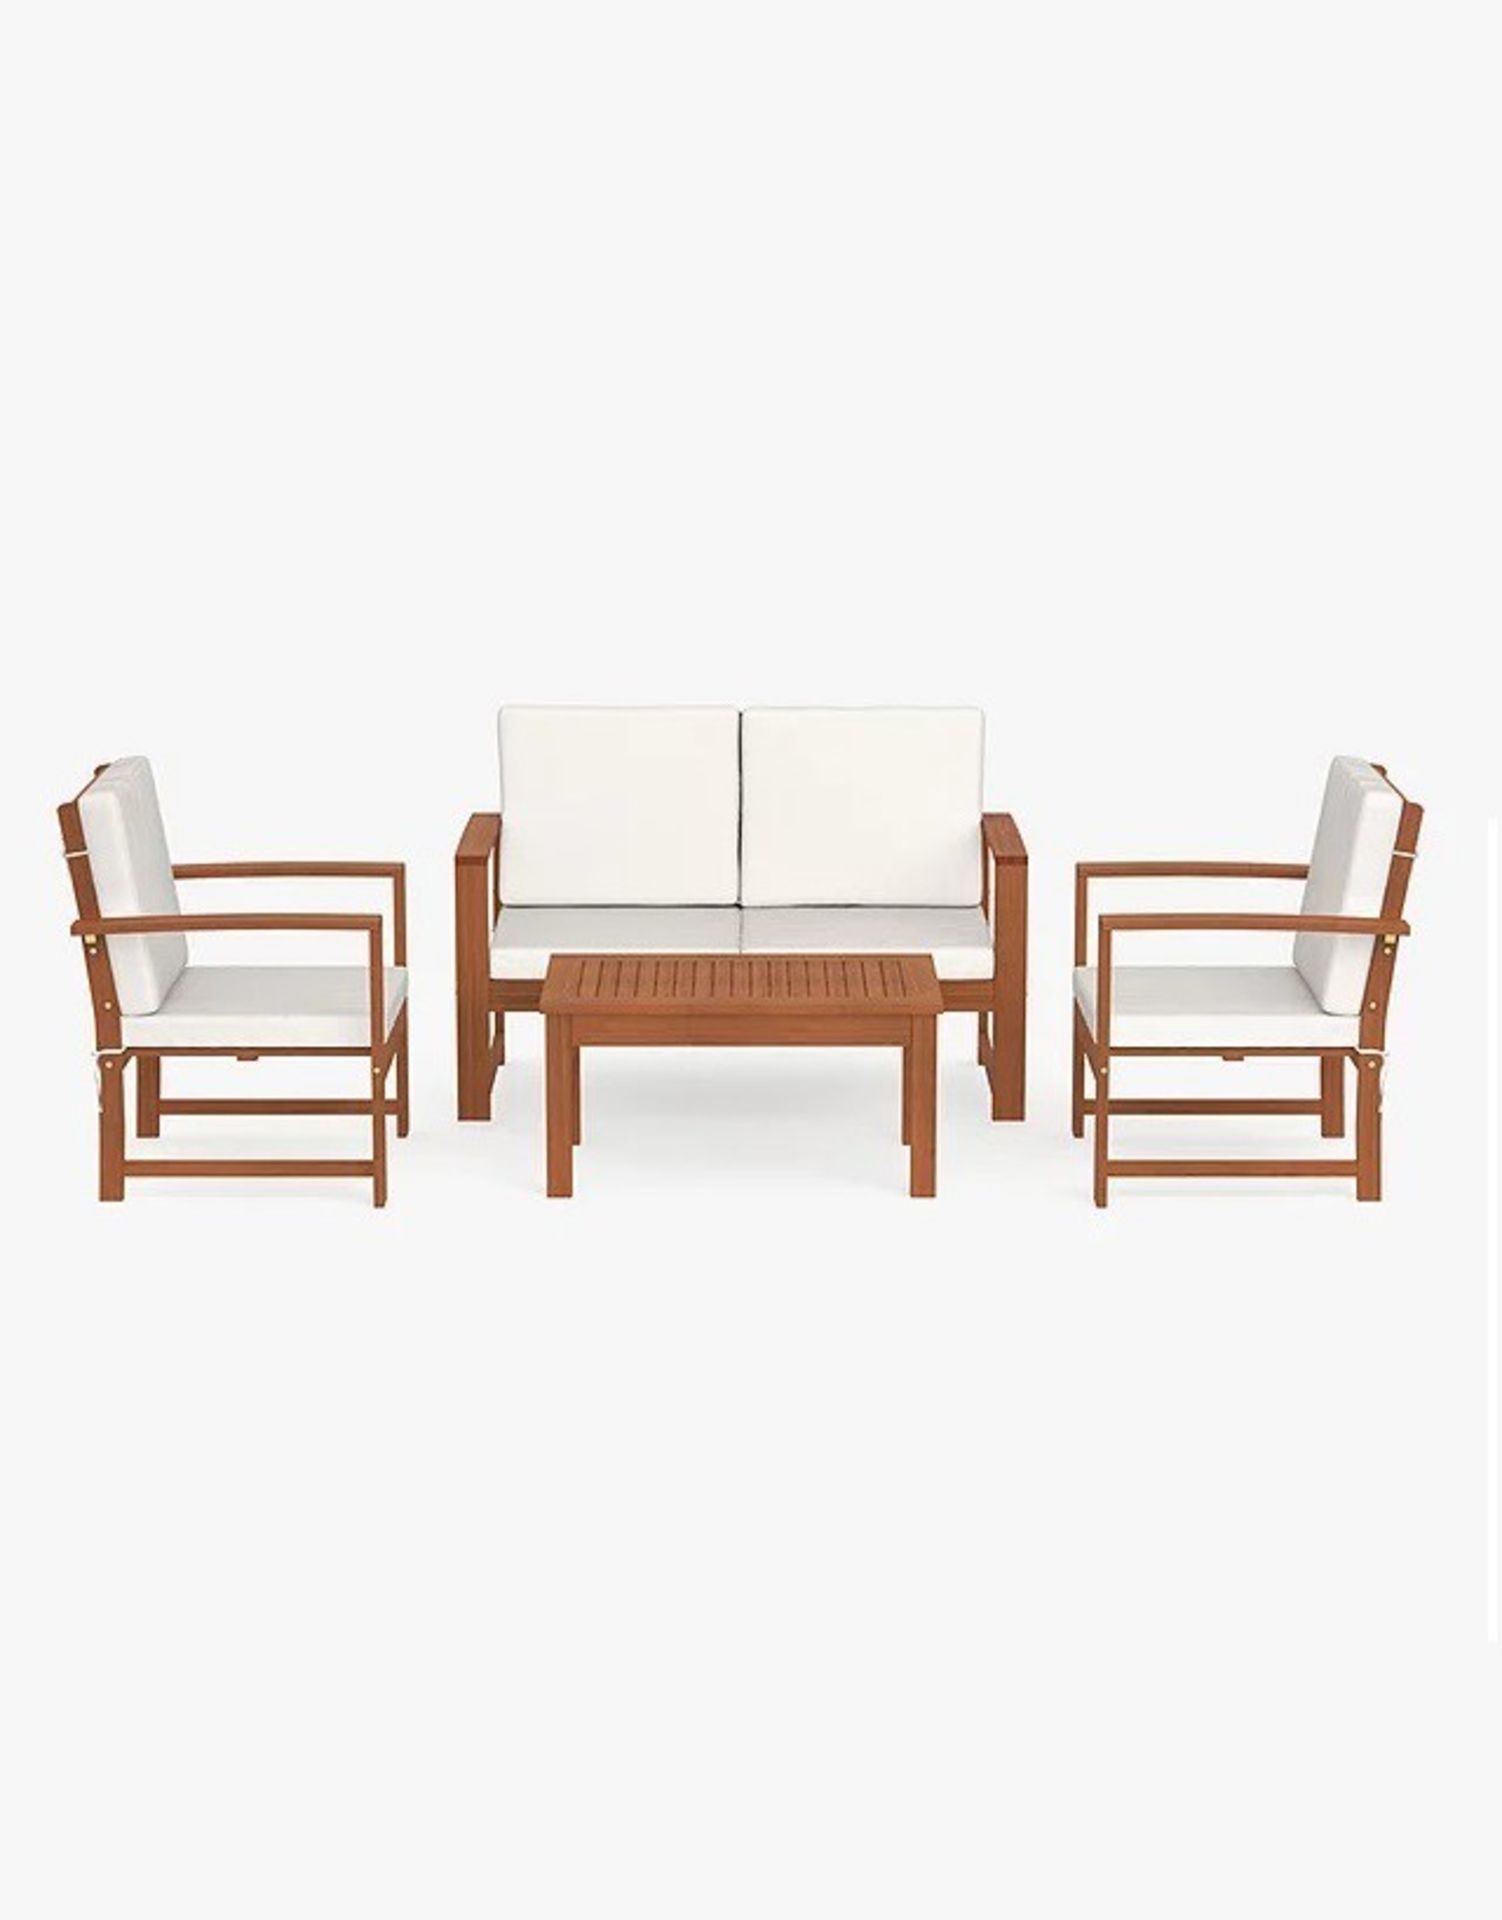 5 X BRAND NEW JOHN LEWIS 4-Seater Garden Lounging Table & Chairs Set. RRP £898.50. Upgrade your - Image 3 of 3